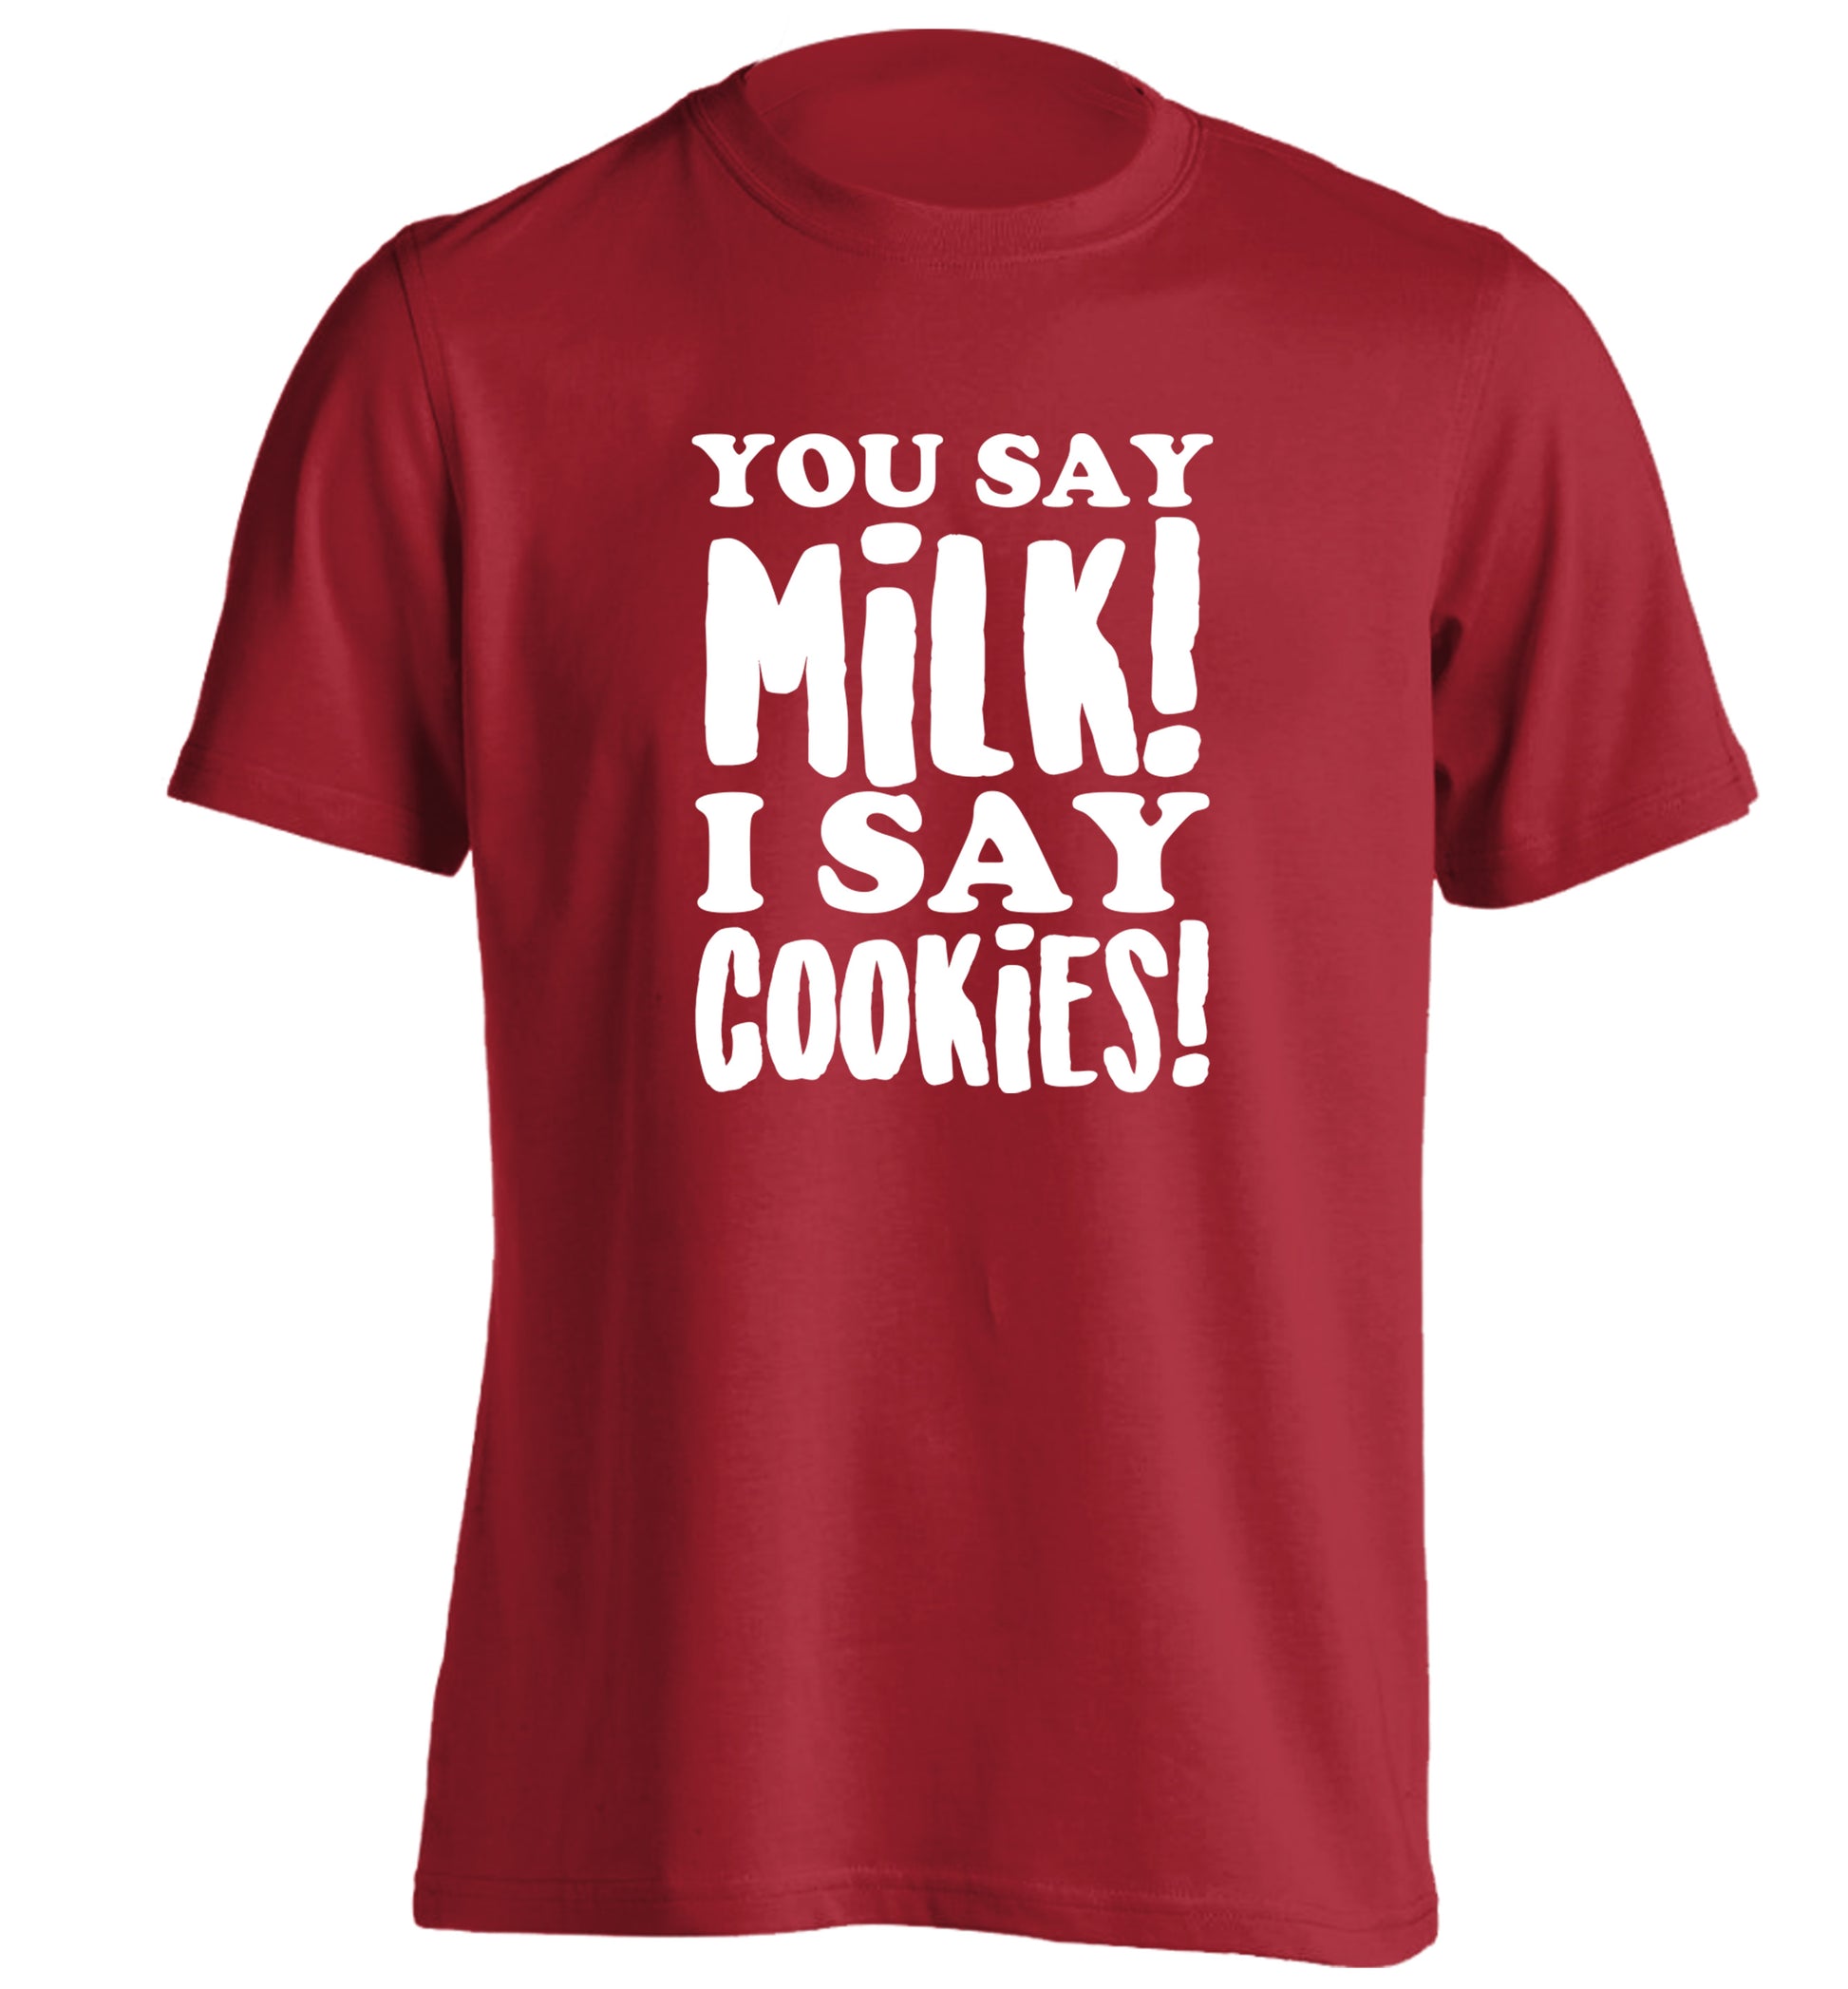 You say milk I say cookies! adults unisex red Tshirt 2XL